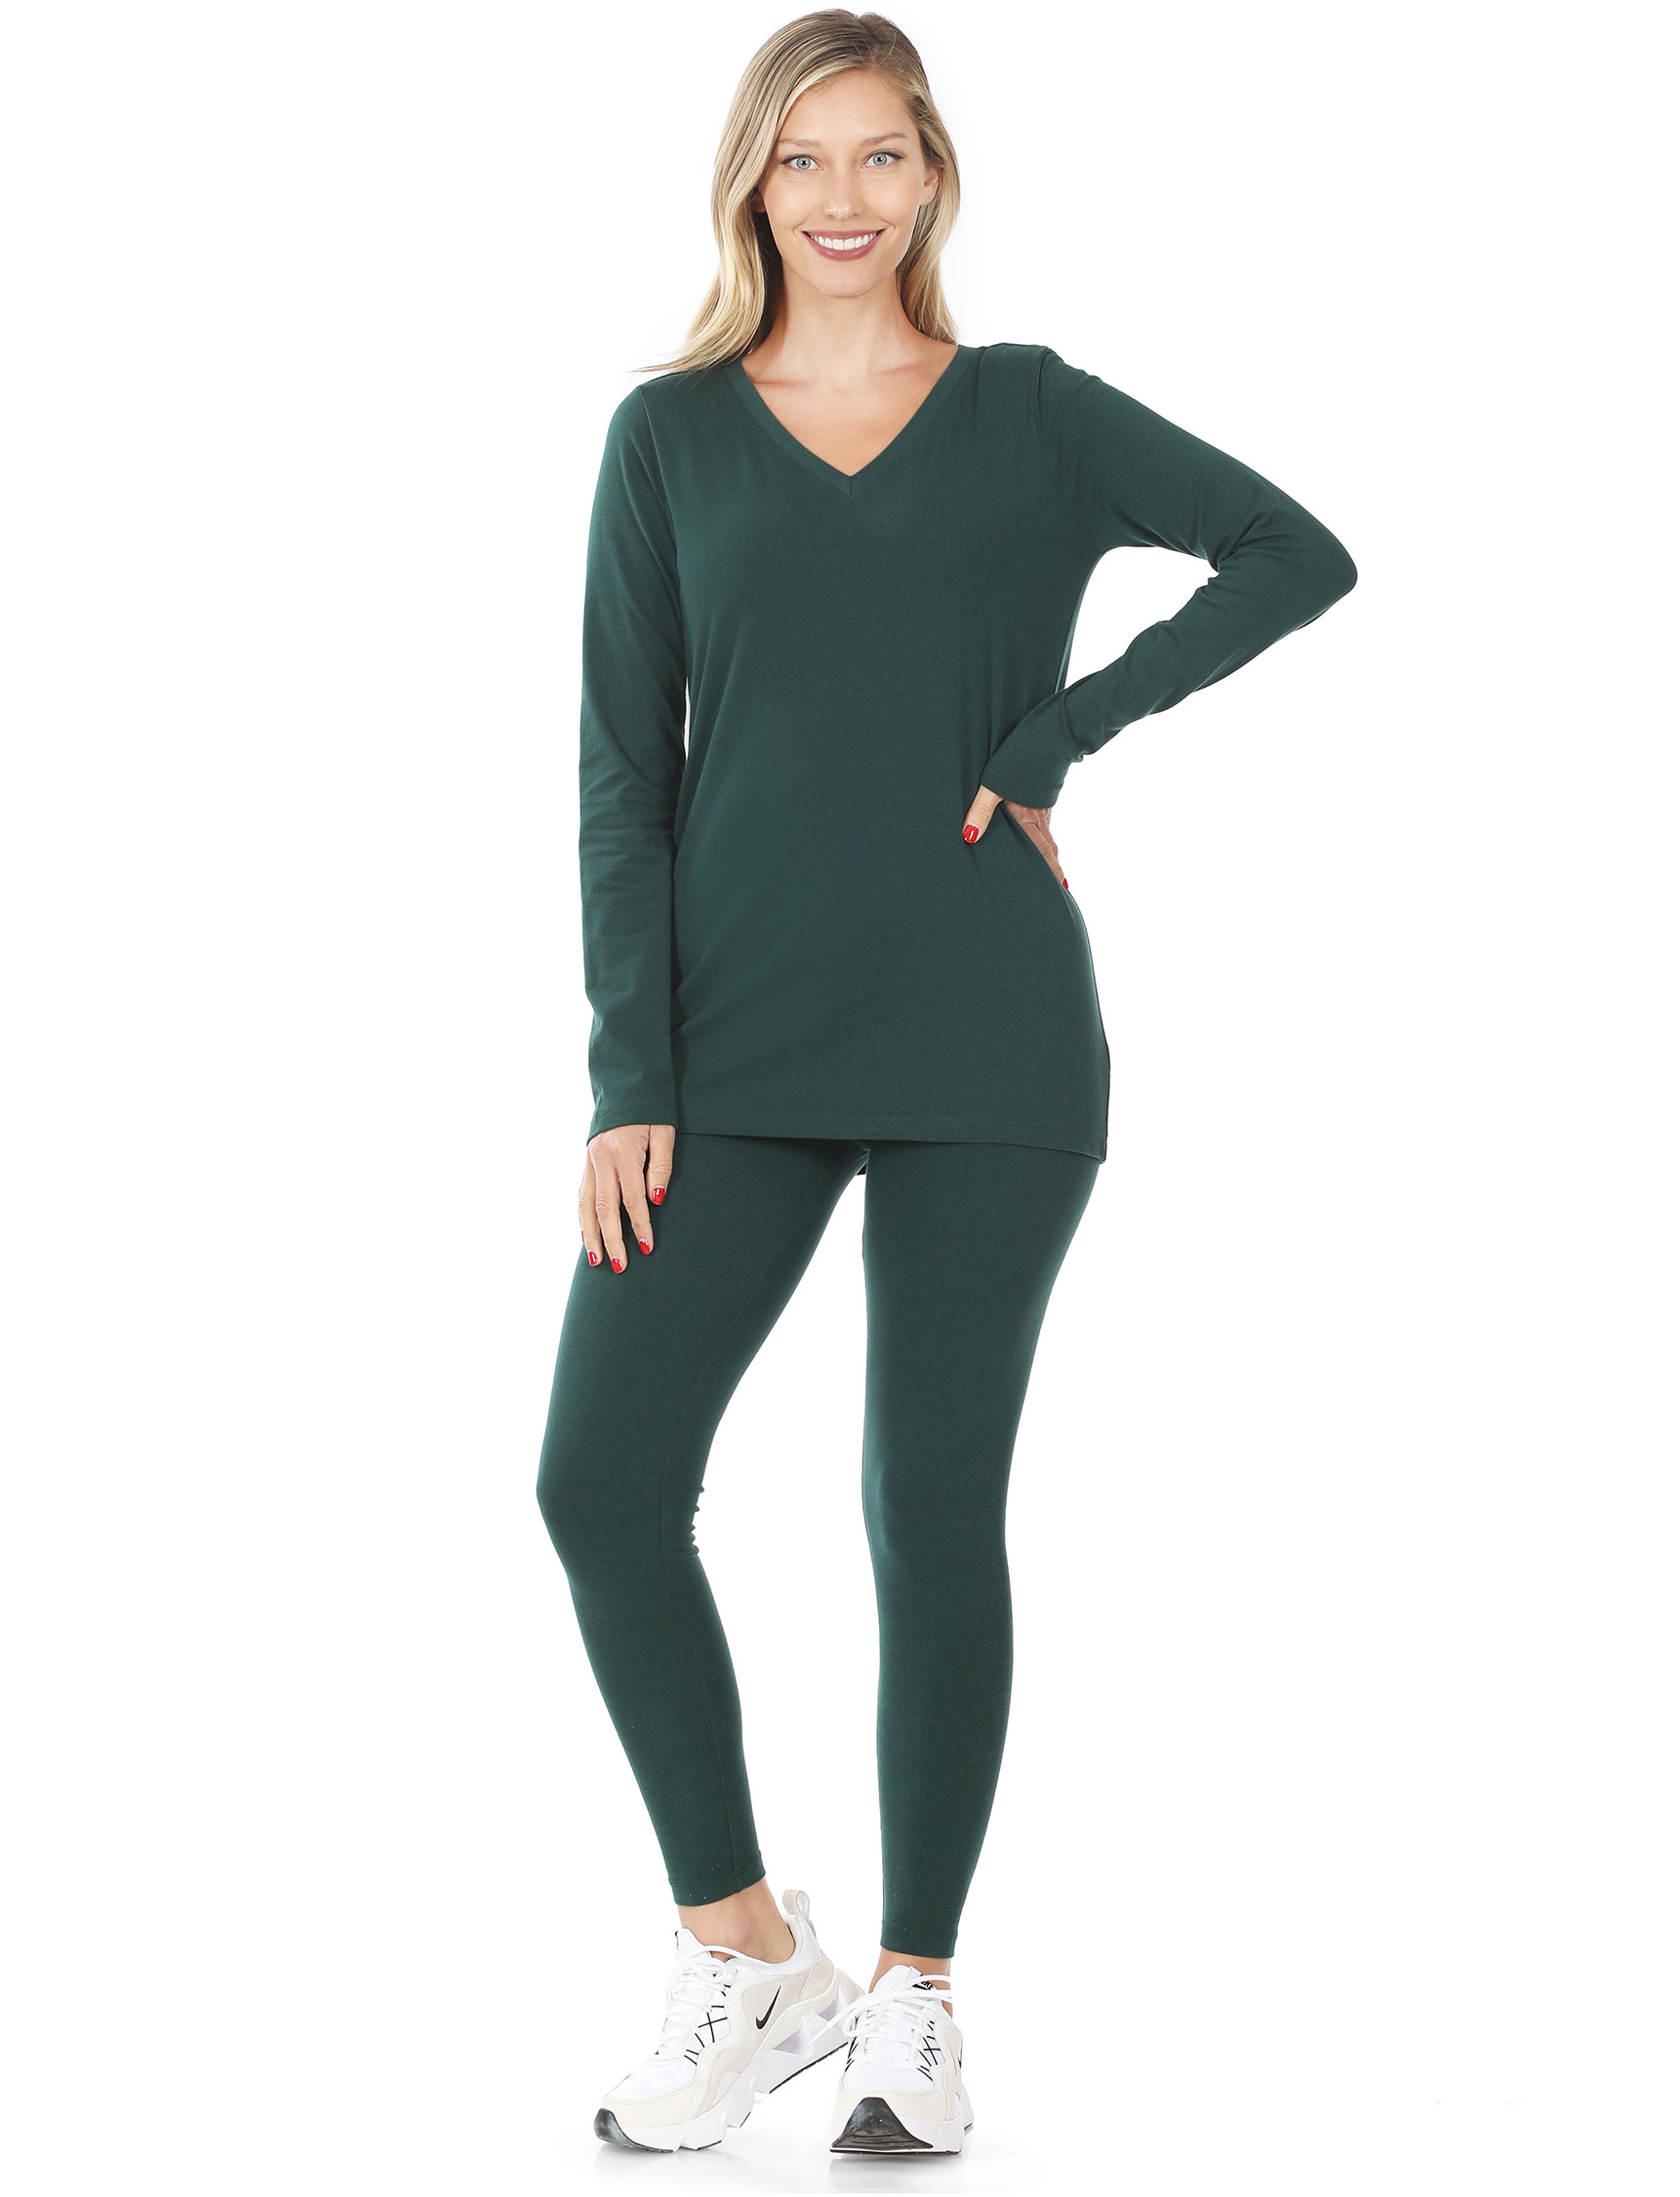 Cotton Tops For Leggings  International Society of Precision Agriculture